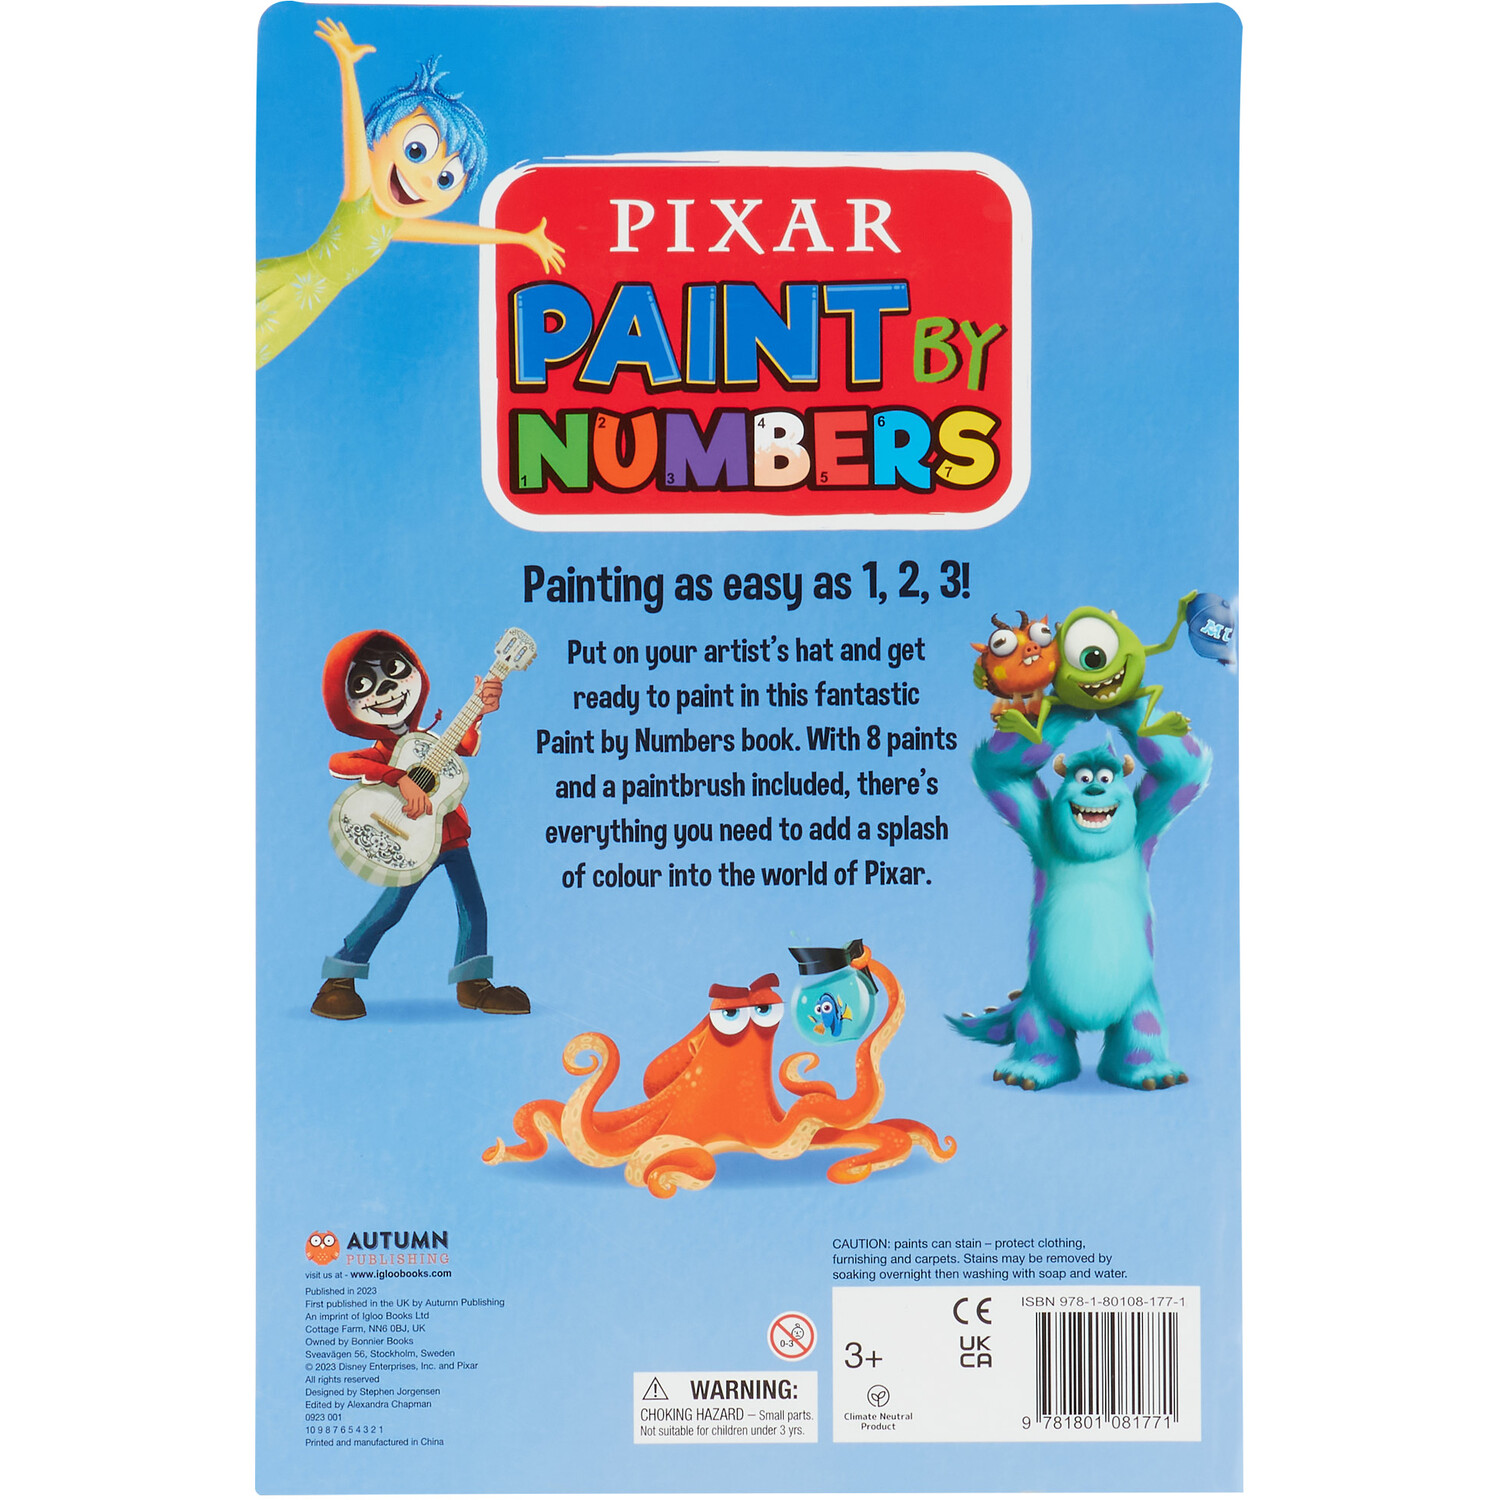 Paint by Numbers Book Image 7